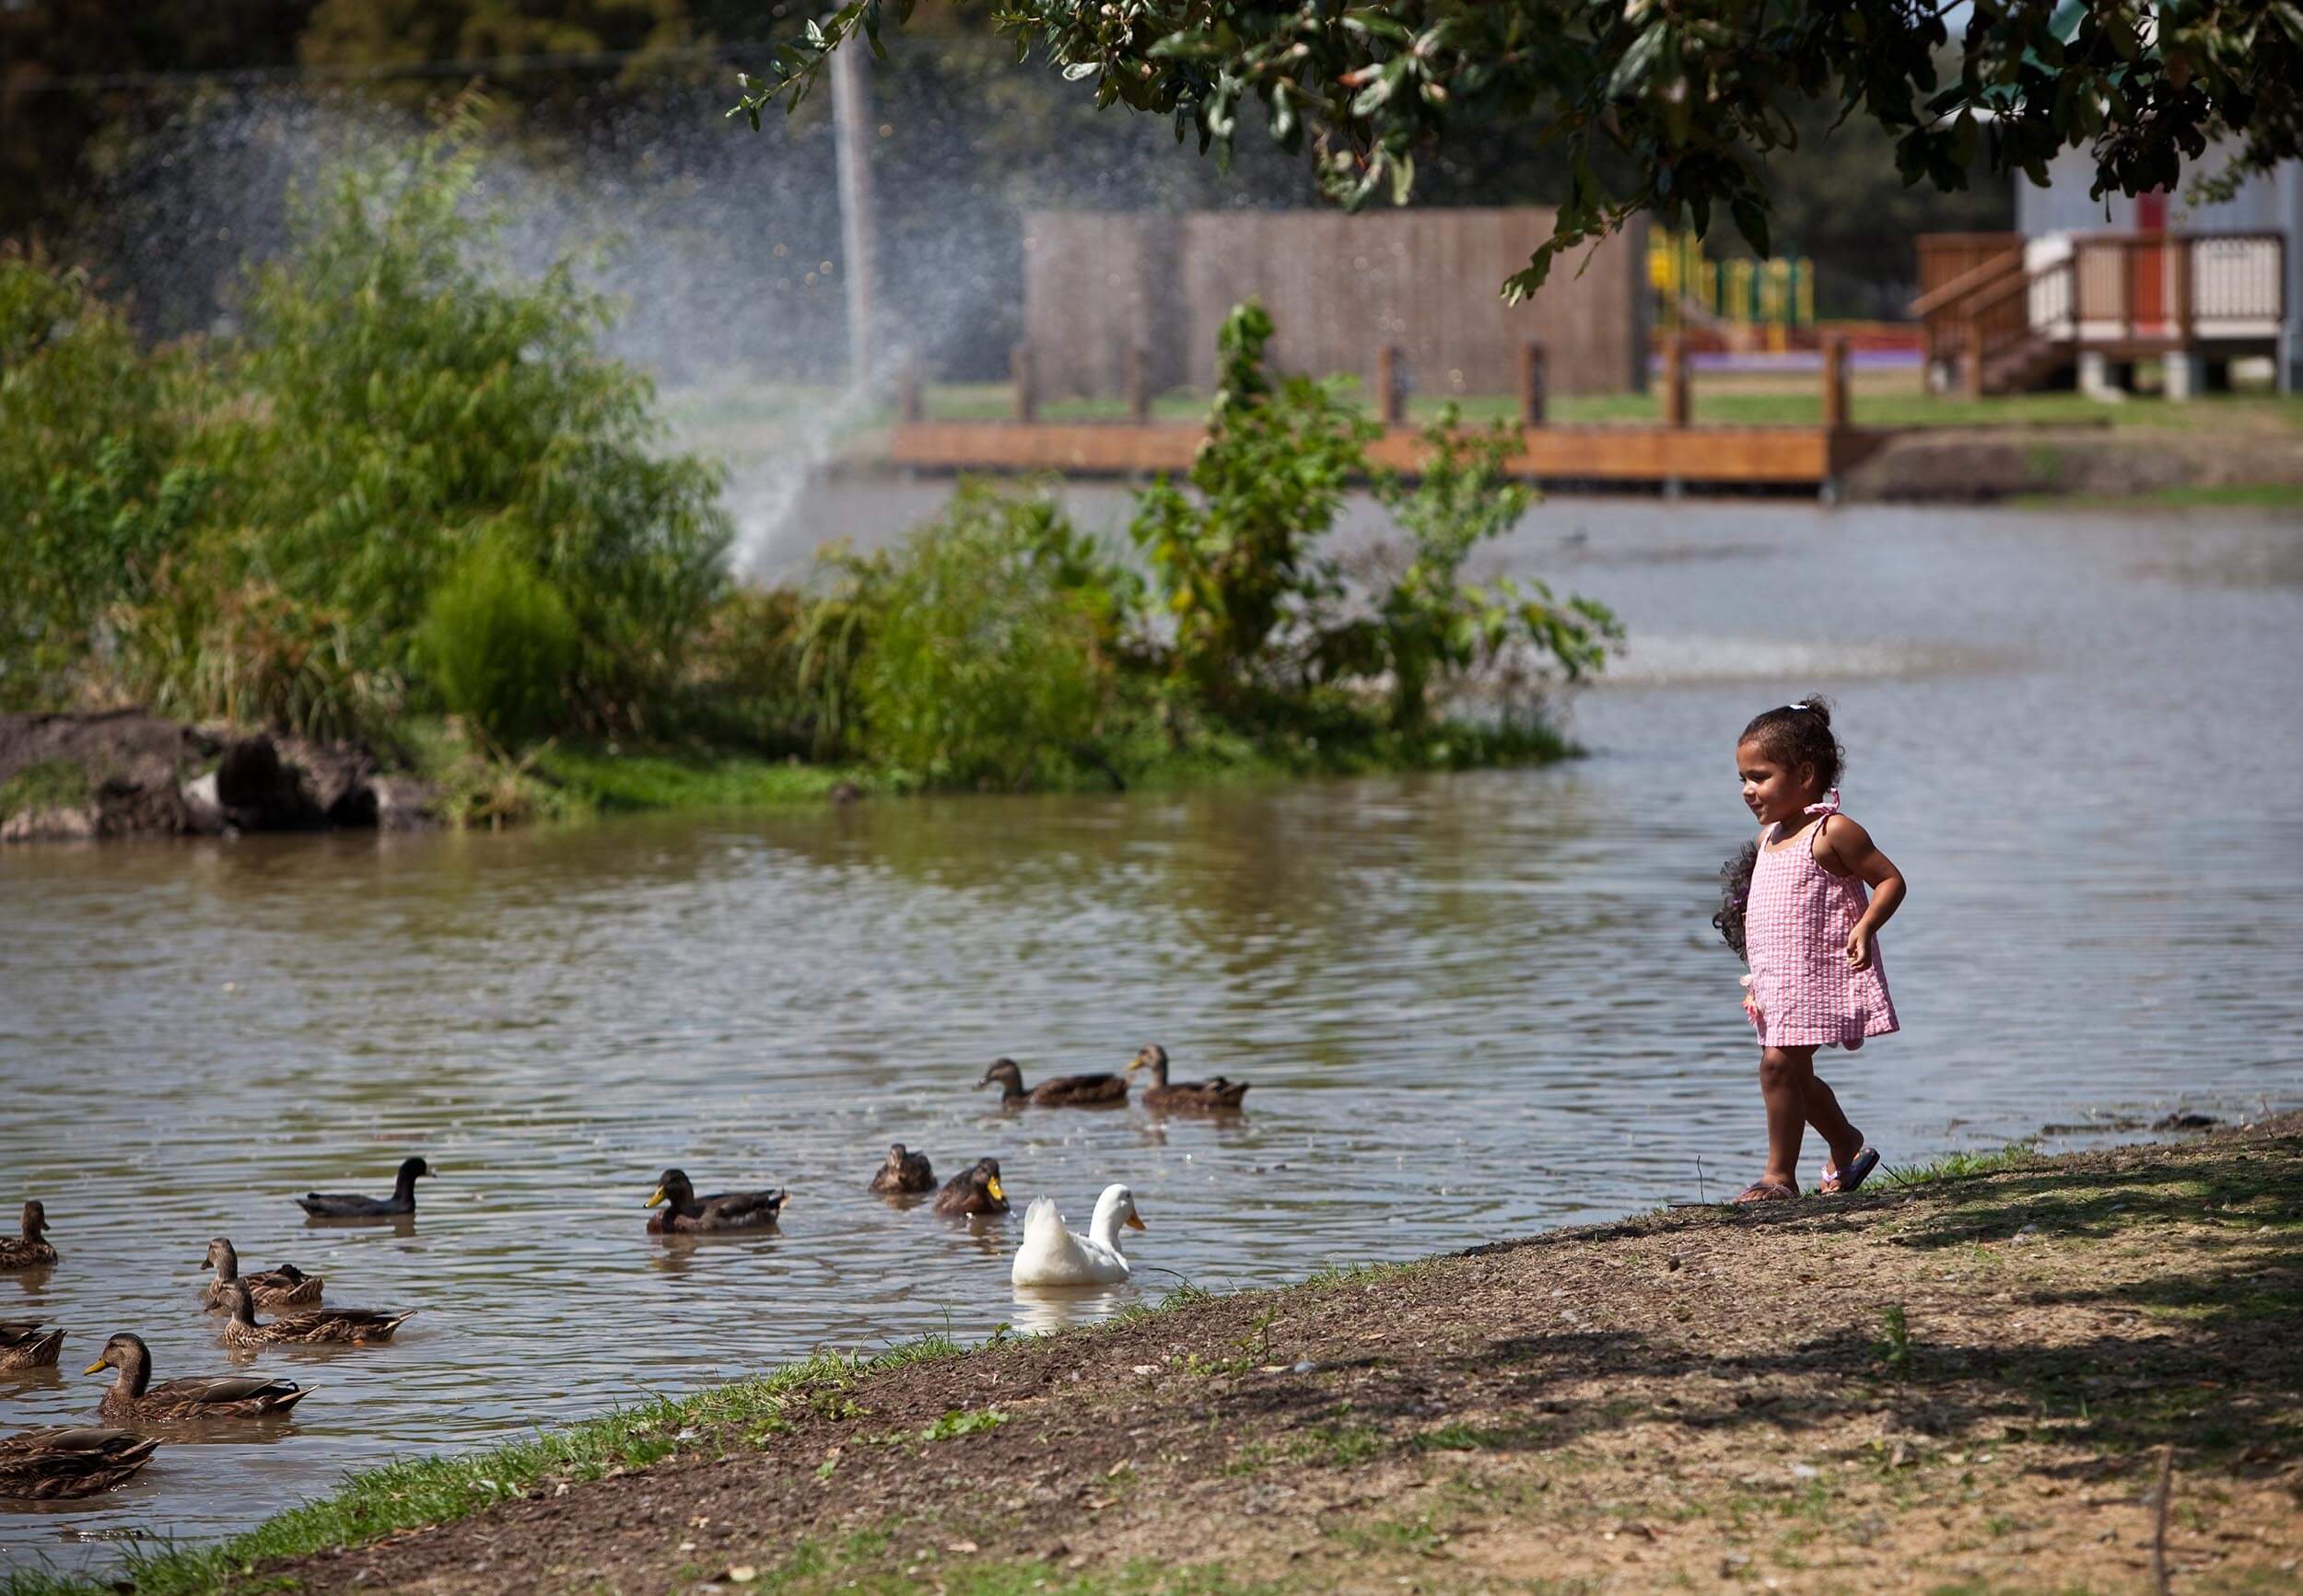 A young girl feeds ducks in a pond in greater New Orleans, LA